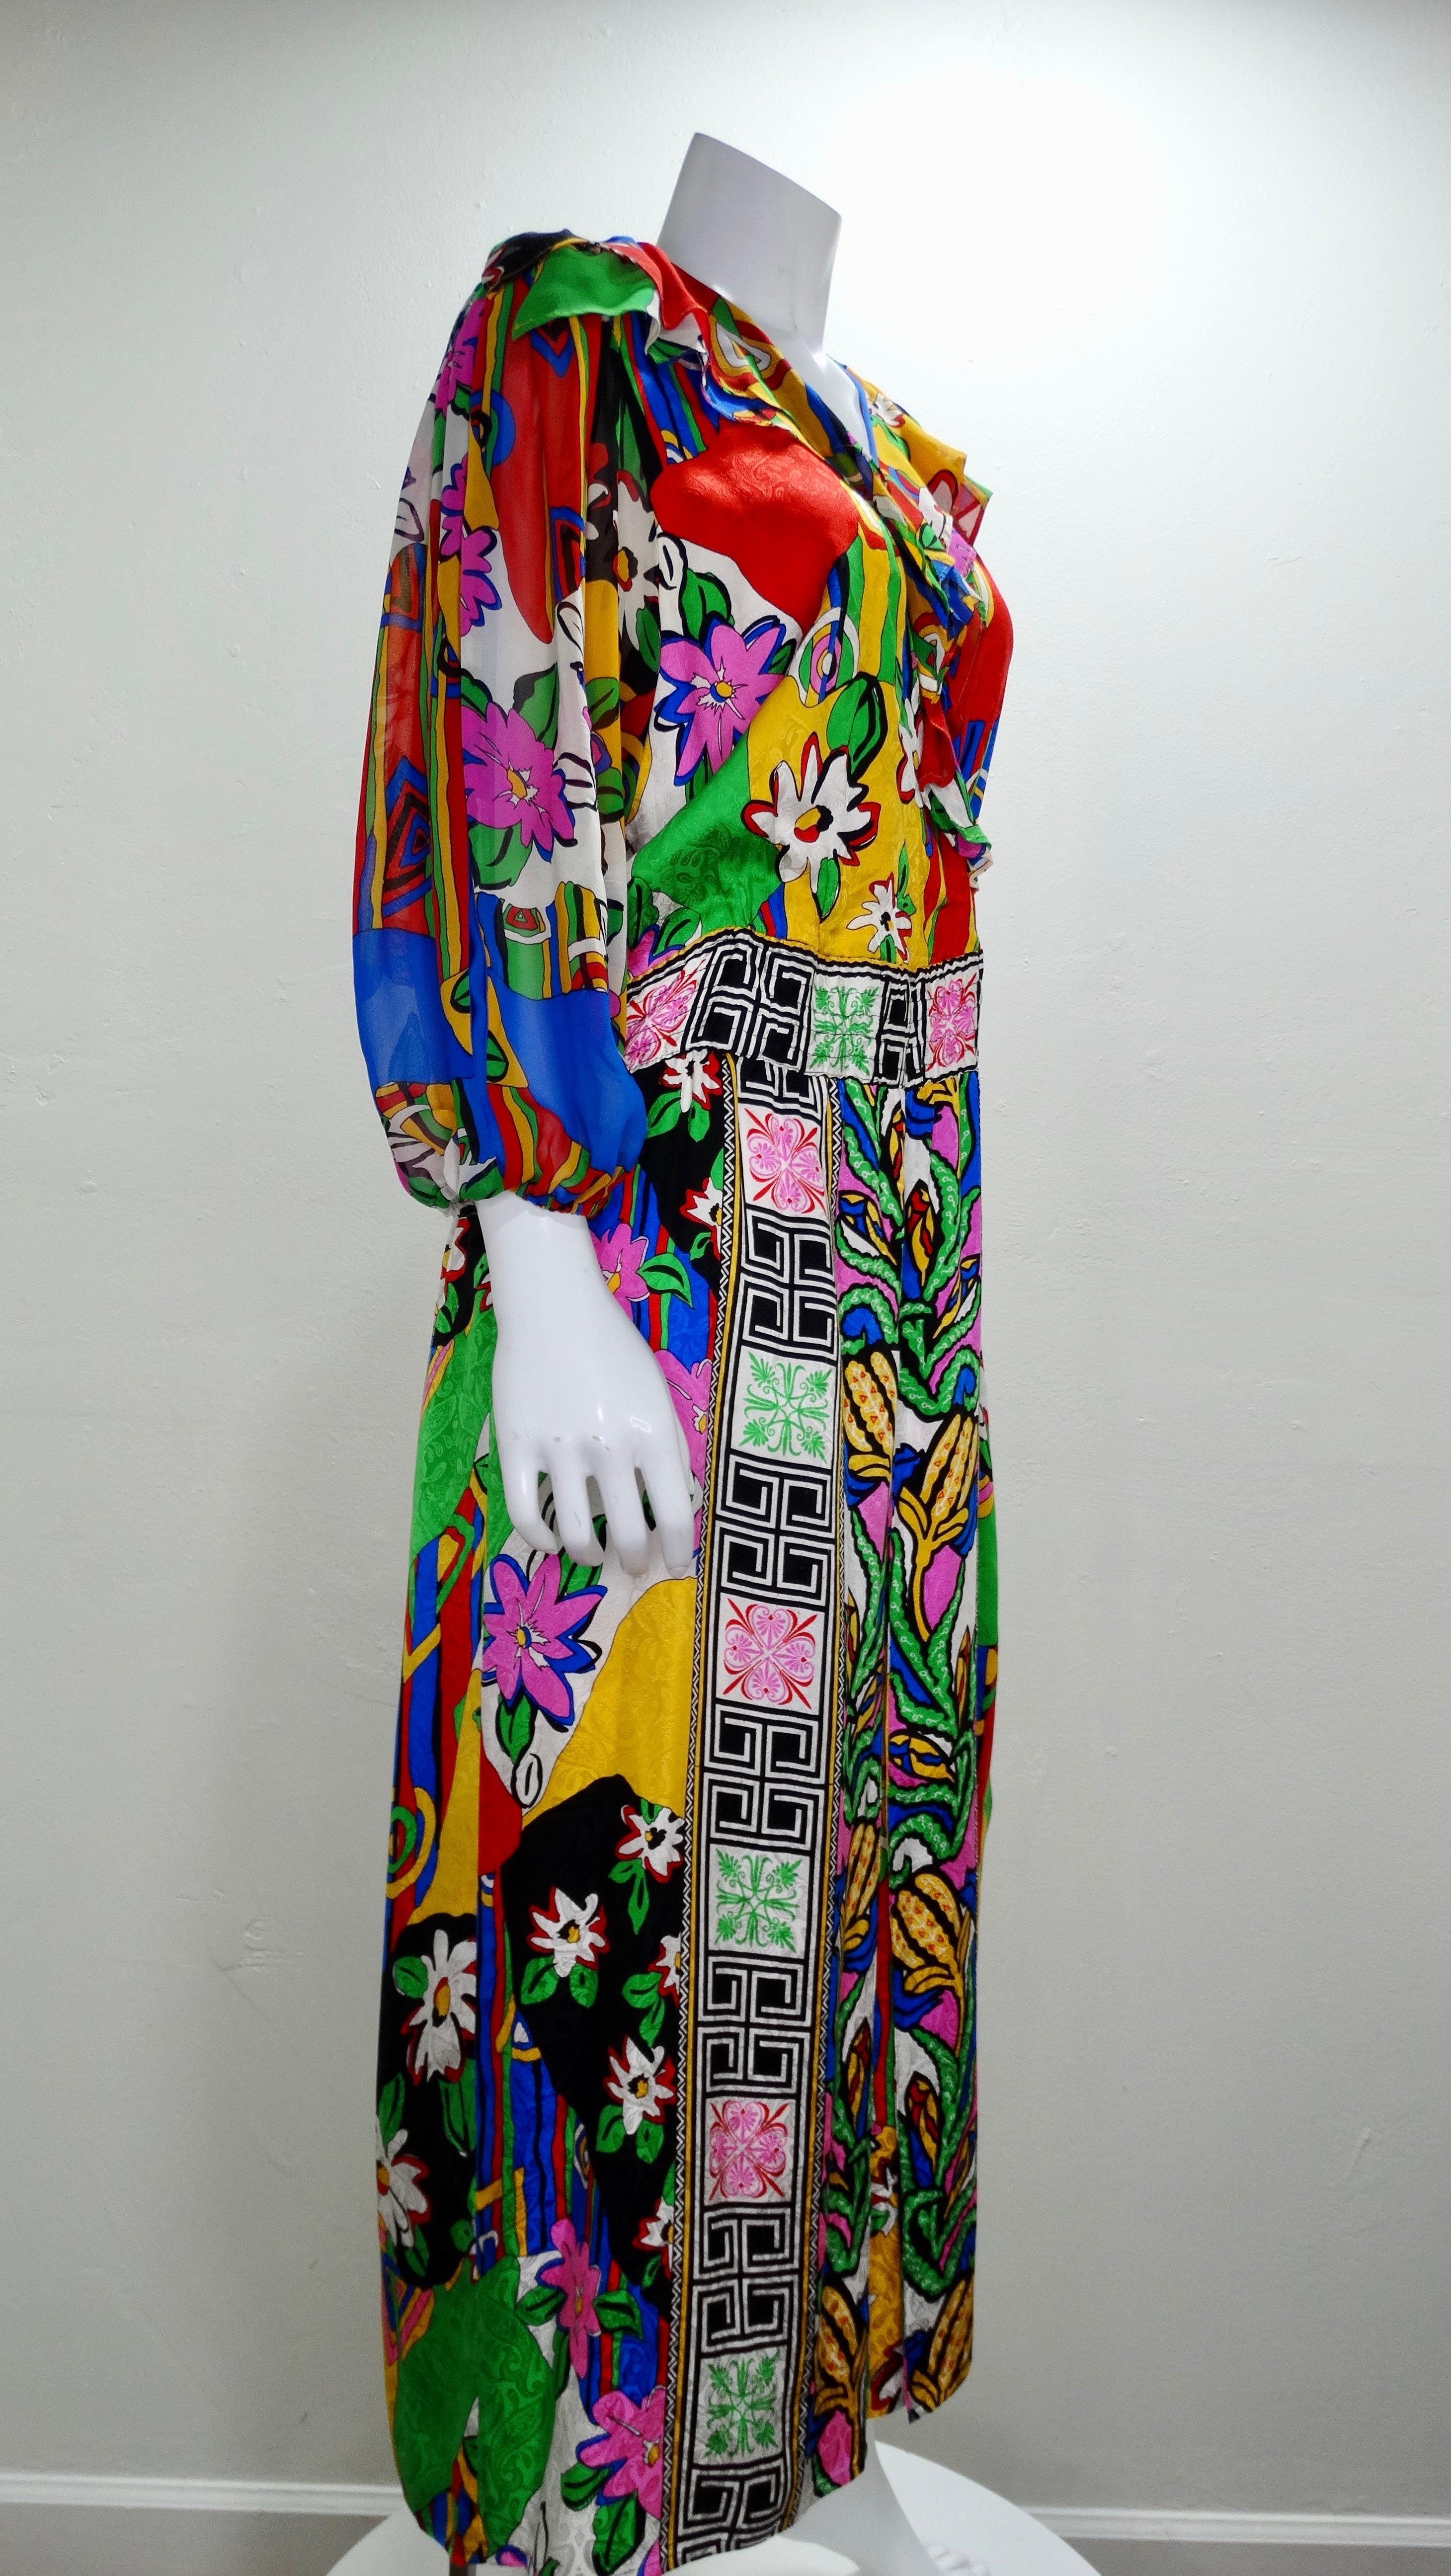 Diane Freis collectors rejoice! This amazing 1980s Diane Freis dress is printed in a bright and bold multicolored floral motif with geometric patterns throughout. V-neck with ruffle trim and cinched waist. Made of 100% silk. Pair with your favorite